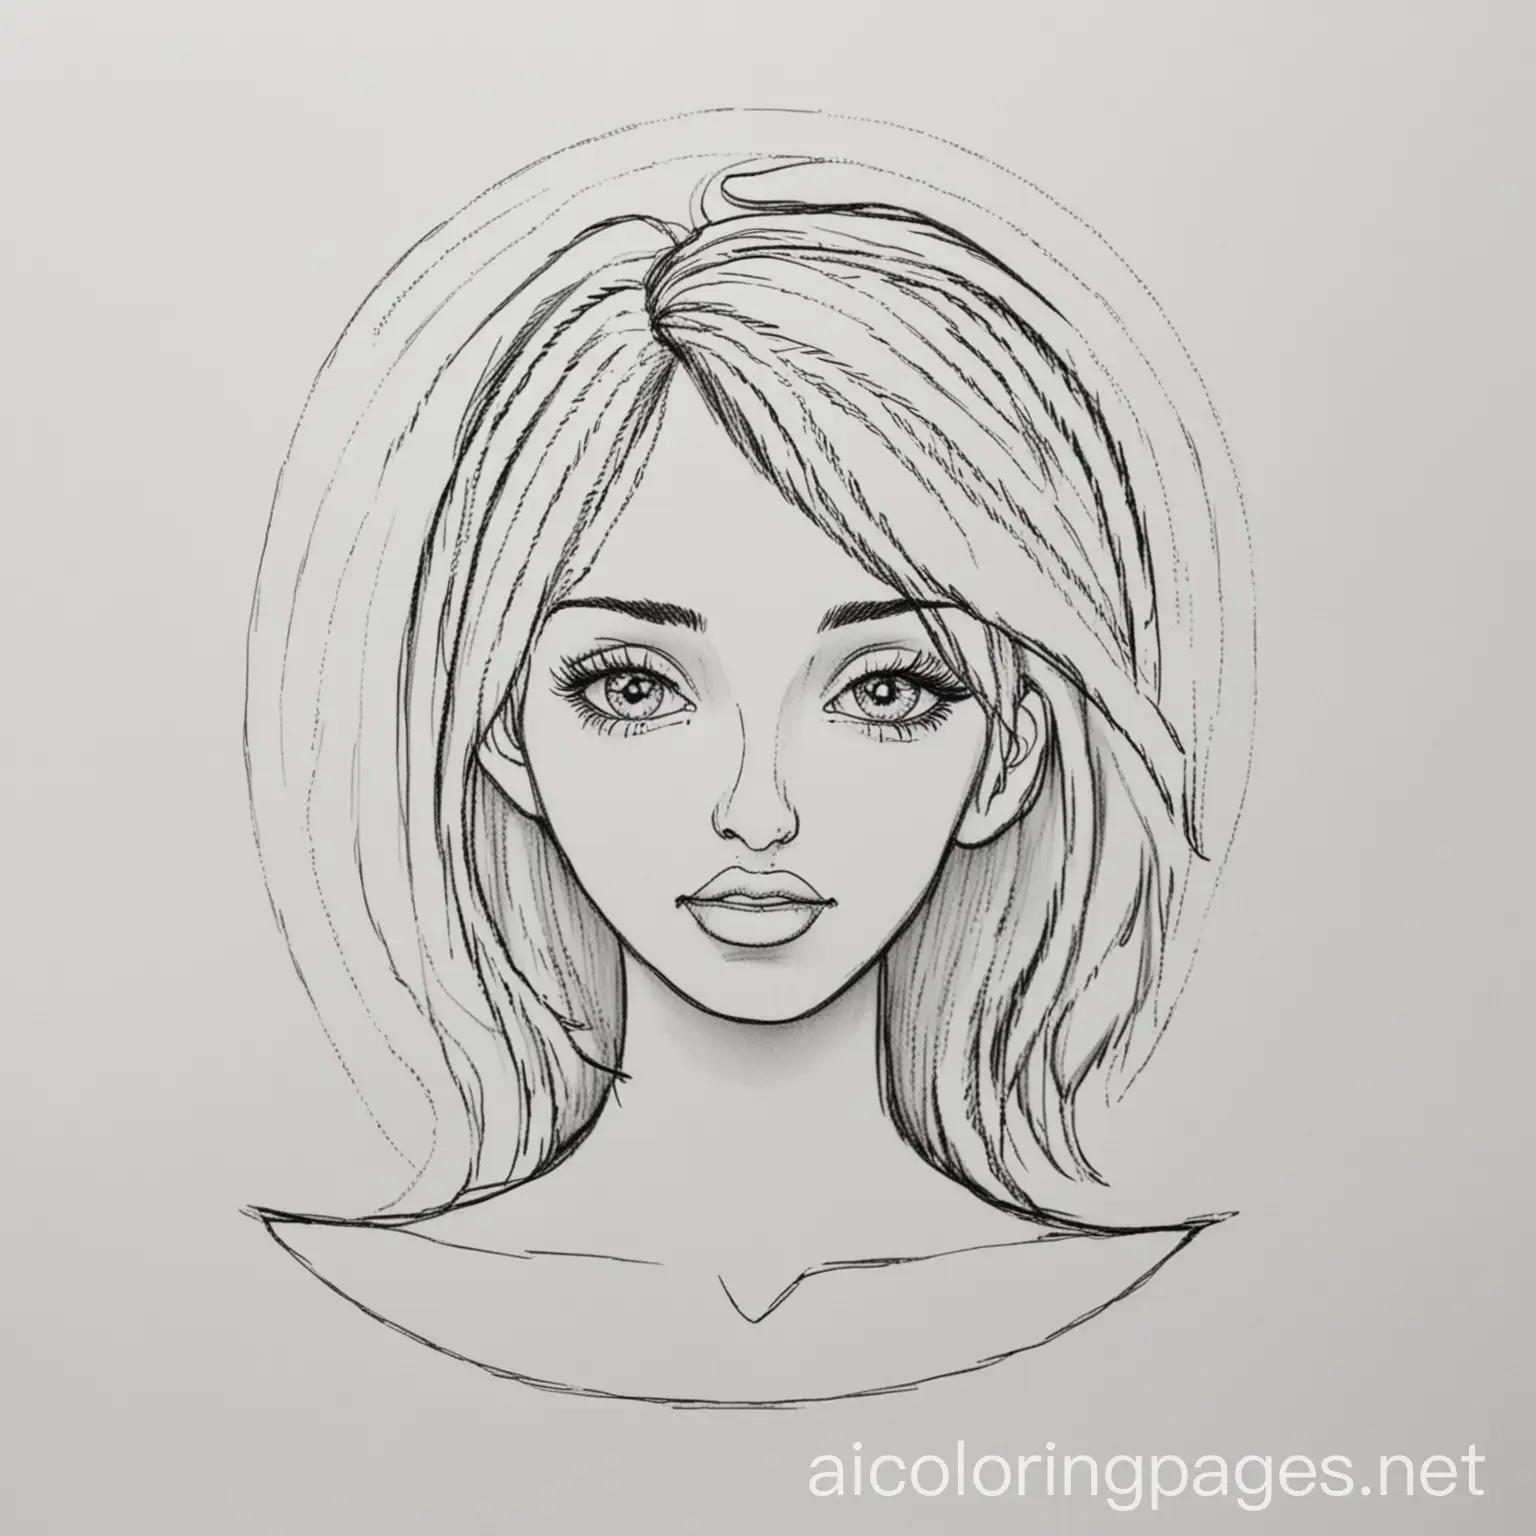 Z, Coloring Page, black and white, line art, white background, Simplicity, Ample White Space.